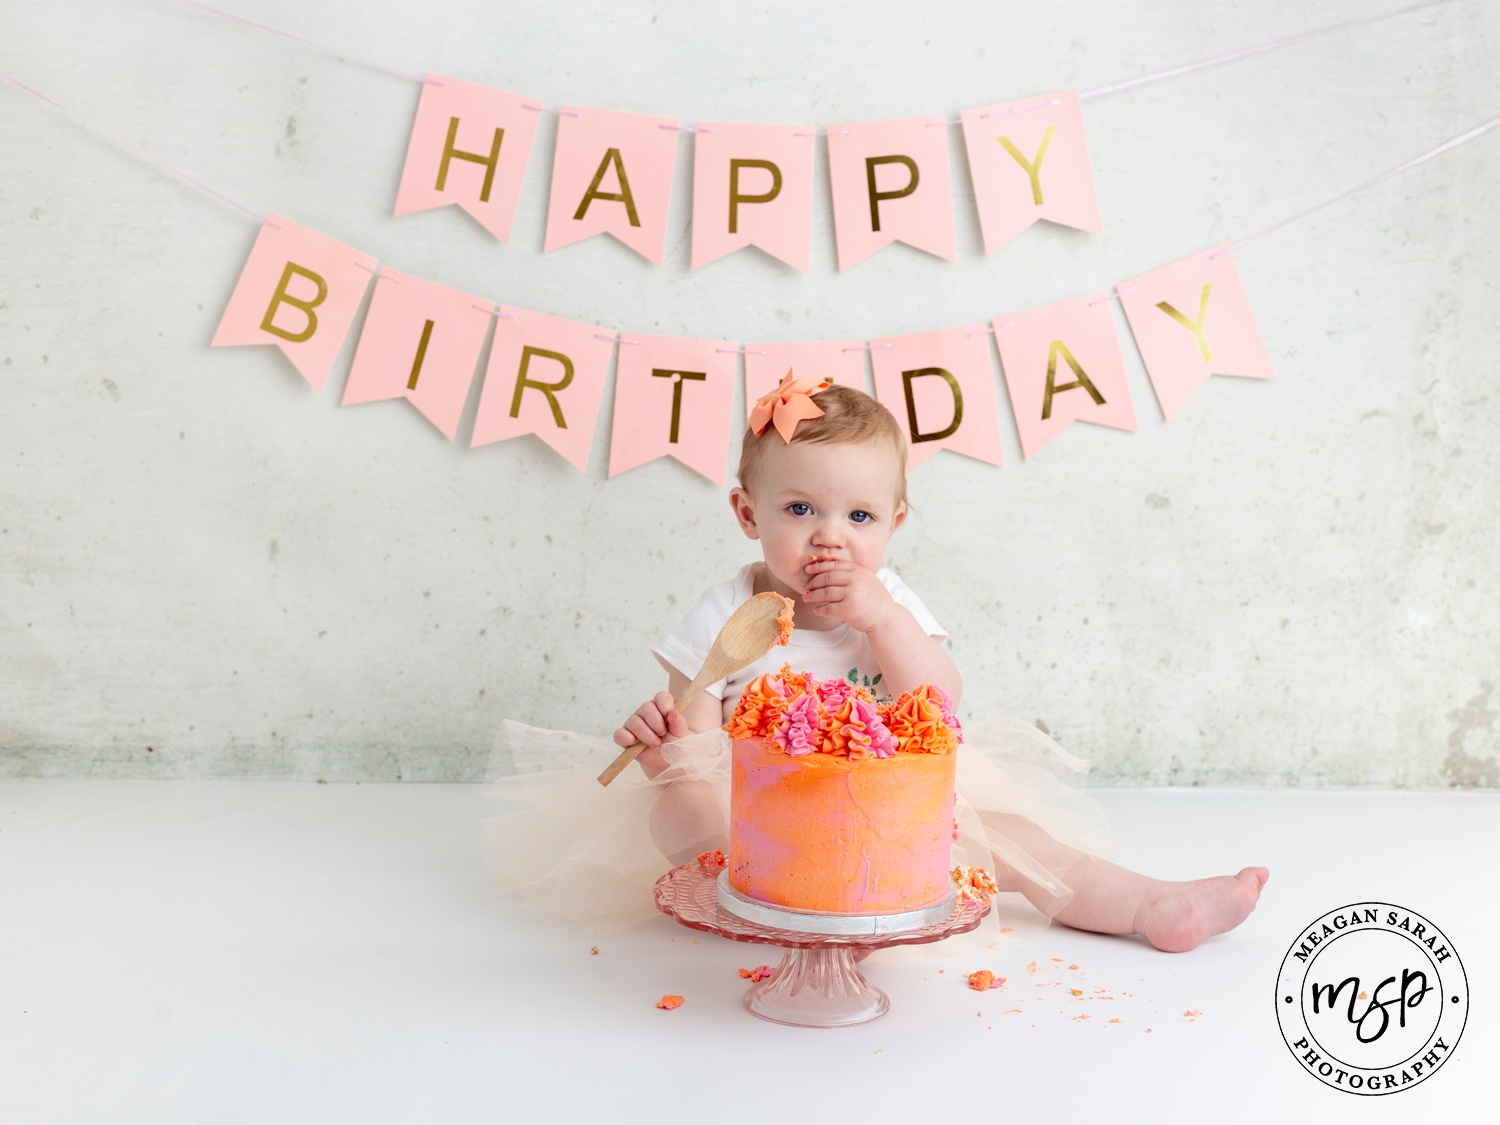 Baby fun,Birthday Idea,Cake,Cake smash,Cake smash ideas,First Birthday,Happy Birthday,Little Ones,Leeds Photographer,Cute babies,Baby Pictures,Baby Photography Leeds,Baby Photographer Leeds,1 year old photography leeds,Meagan Sarah Photography,Professional Photographer in Leeds,West Yorkshire Photographer,Baby Girl,Pink Cake,Peach cake smash,Tutu,Affordable photographer leeds,